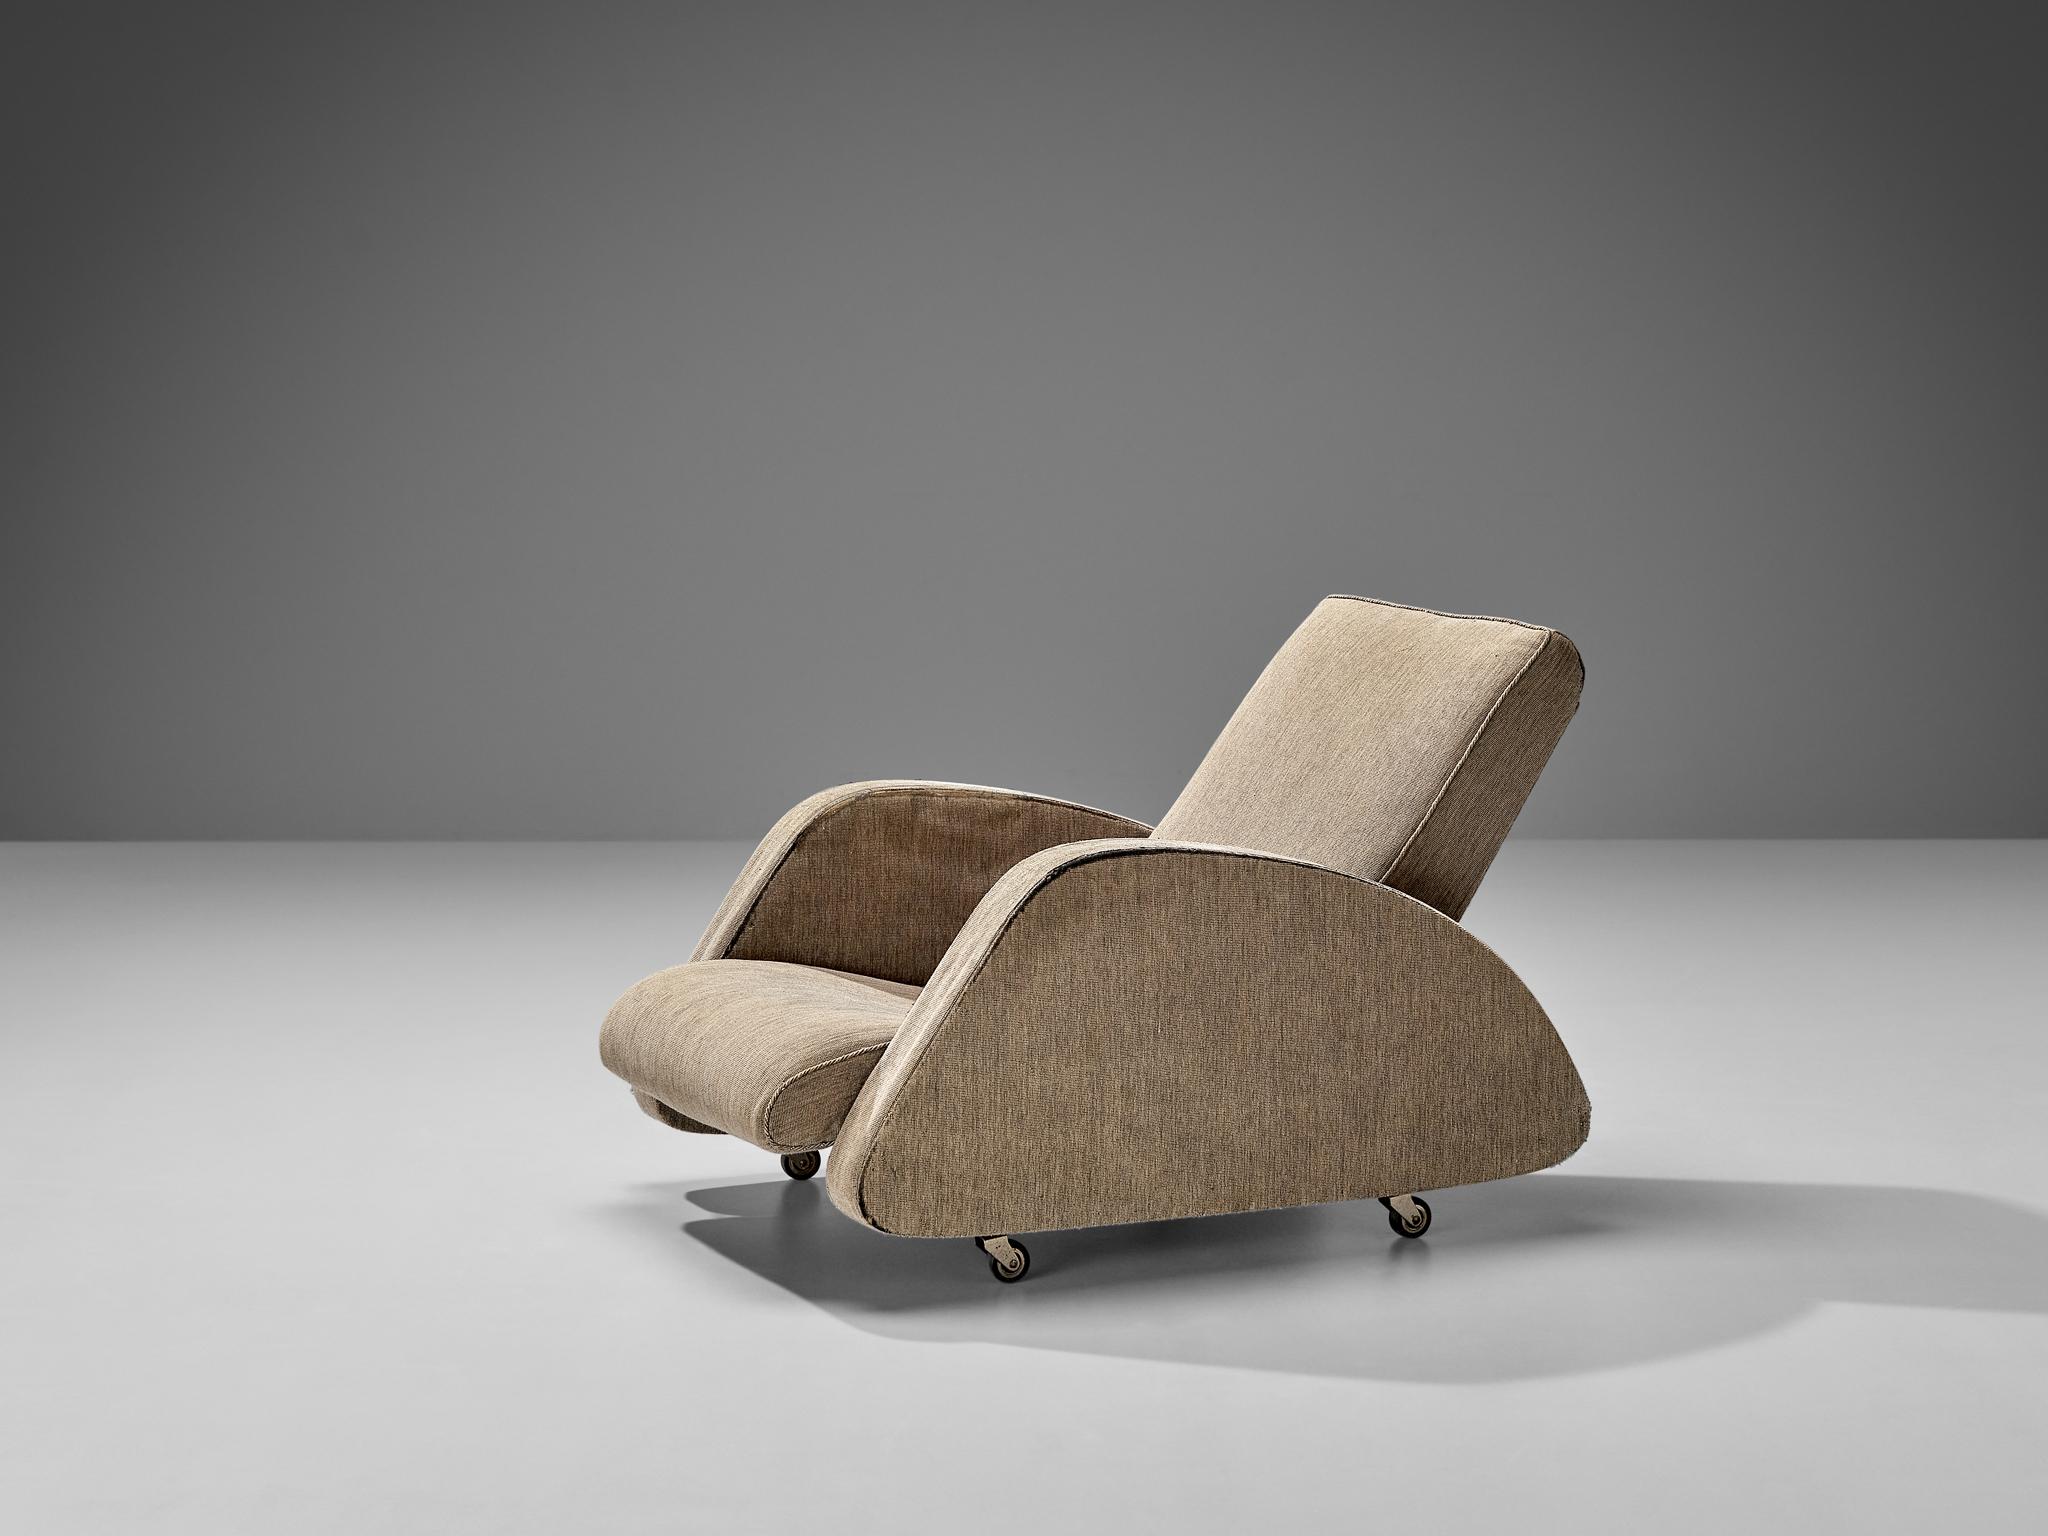 Bo Wretling for Otto Wretling, lounge chair, fabric, metal, Sweden, 1930s

This Finnish-Modern armchair is designed in the thirties by Bo Wretling and crafted by the craftsman Otto Wretling. The design features a seat that is gracefully curved into